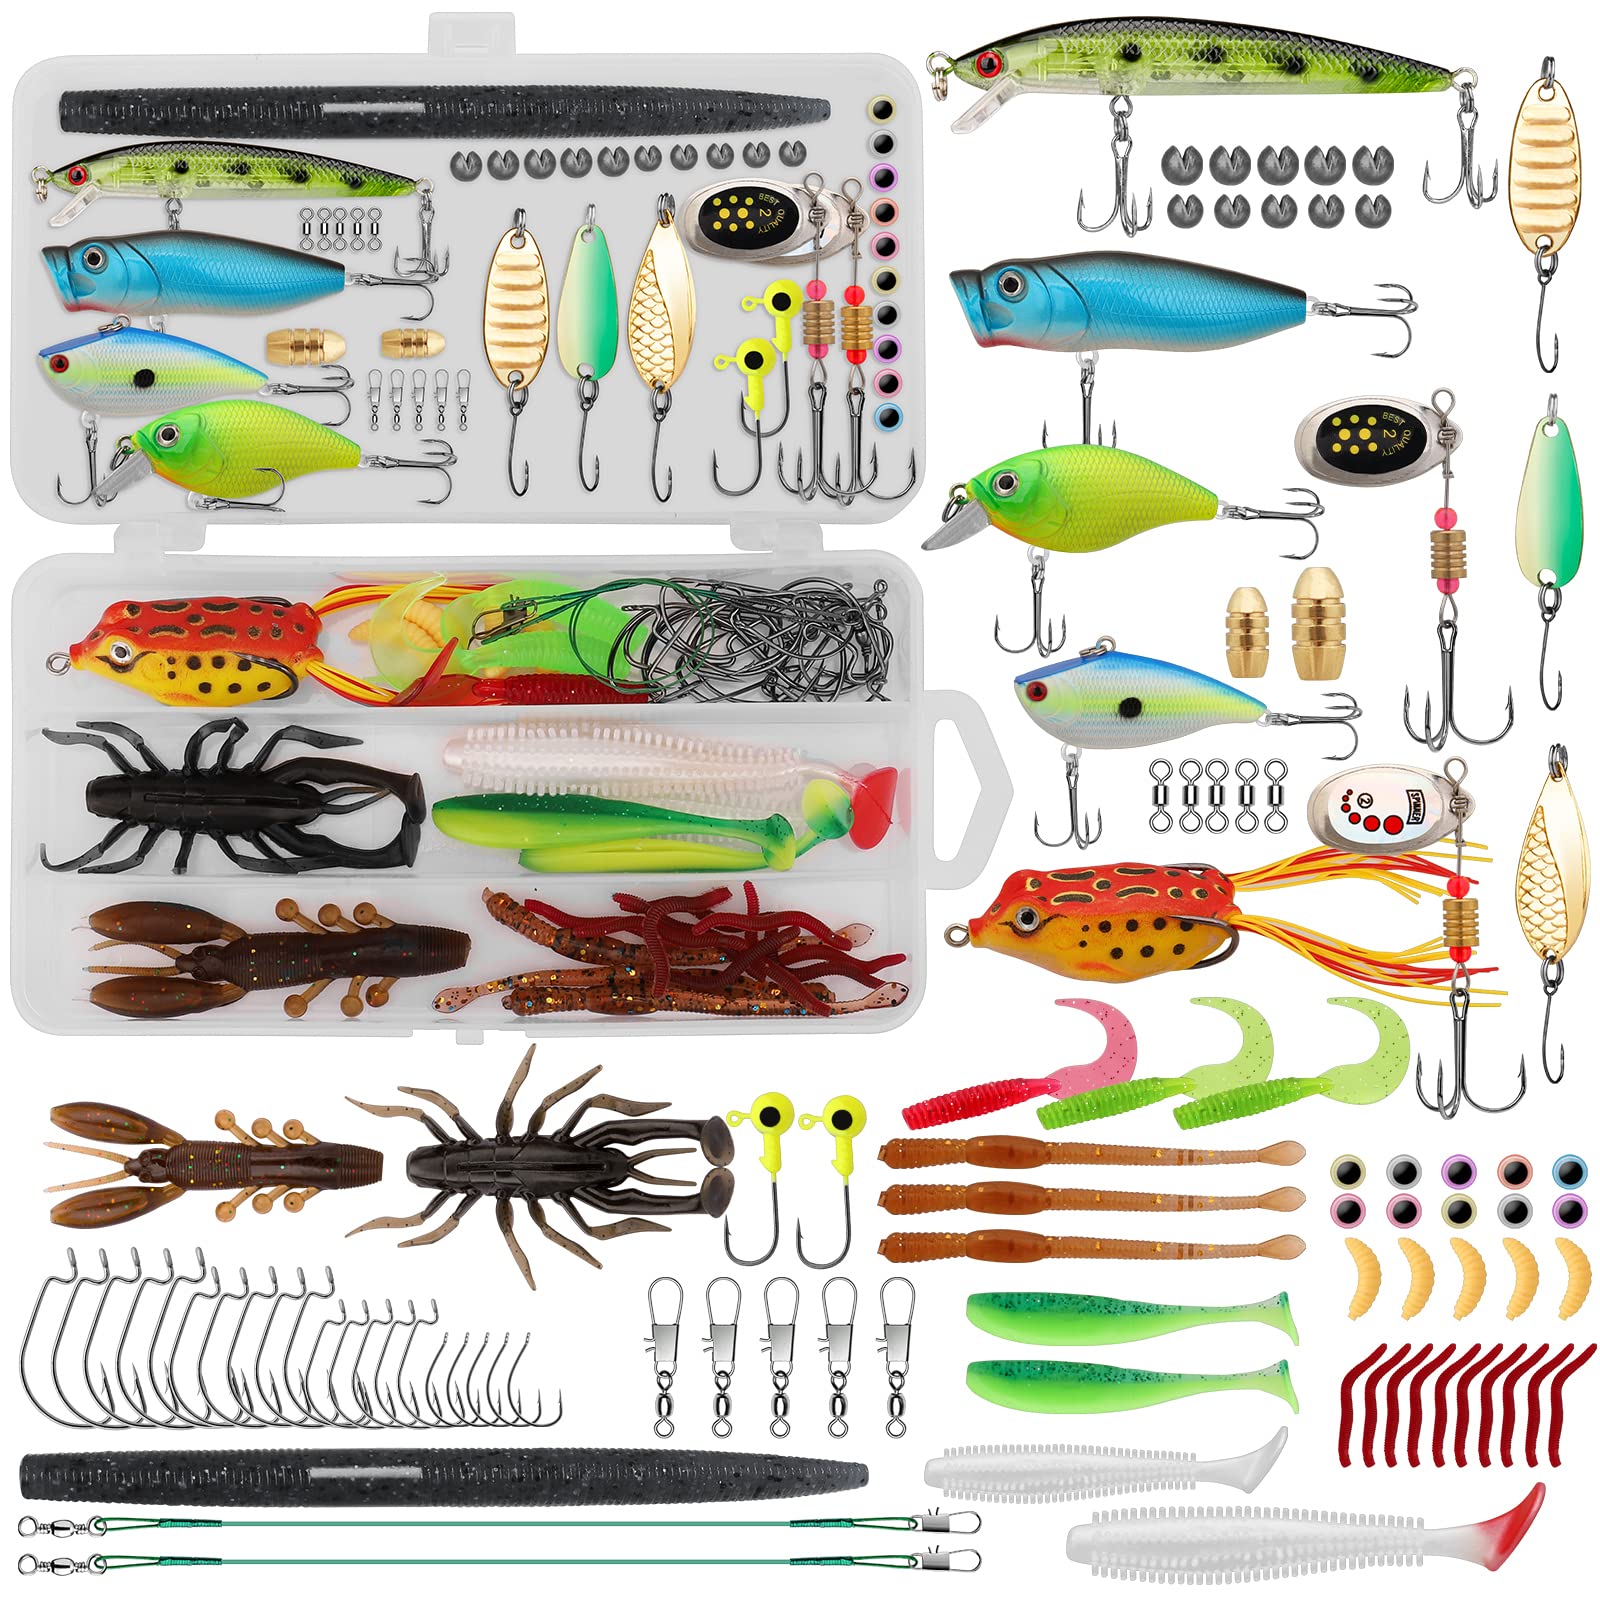 Bait Buddy and Bait Elastic - Tools and Accessories